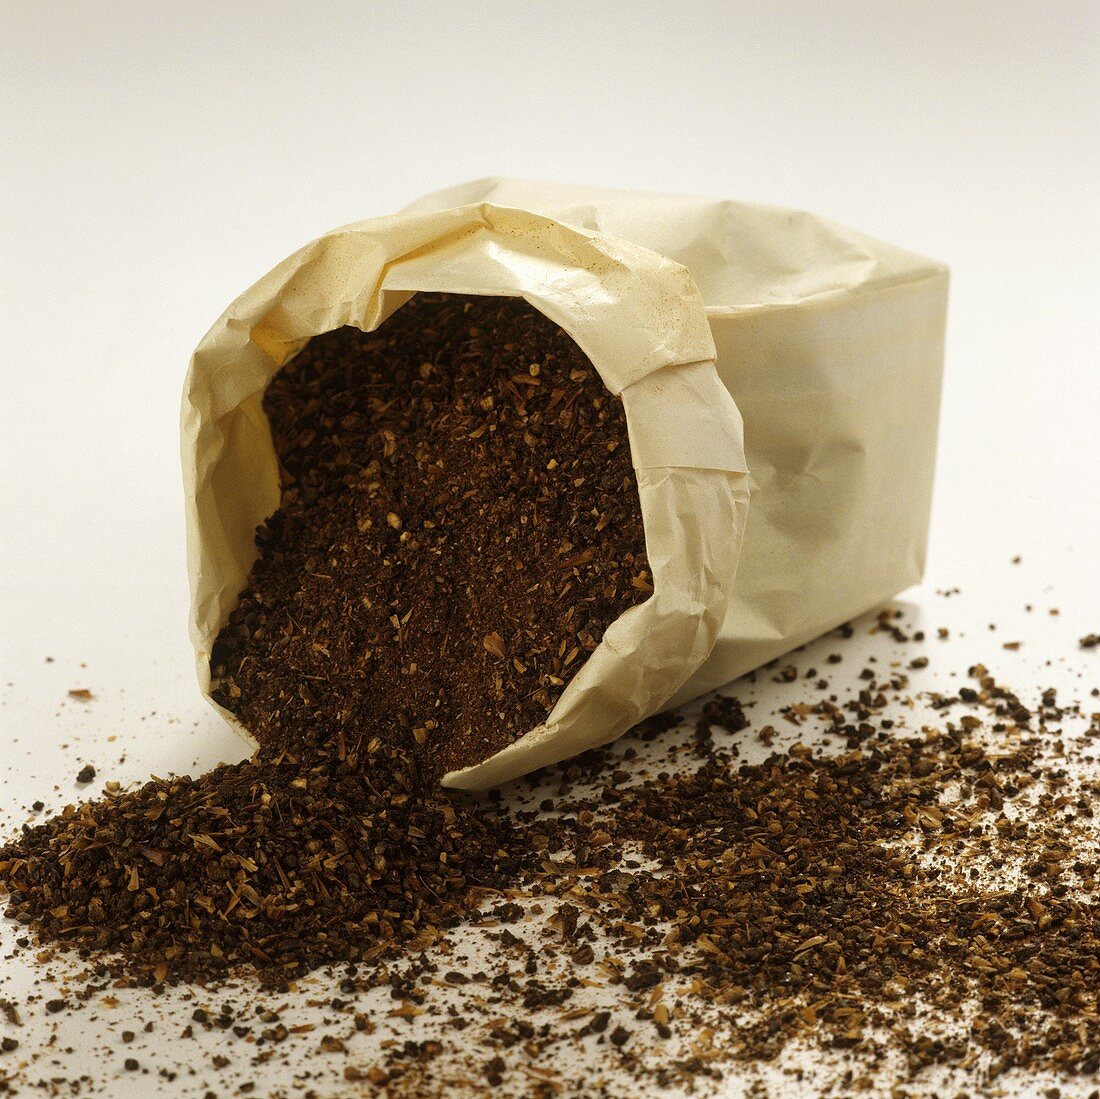 Barley coffee falling out of a paper bag